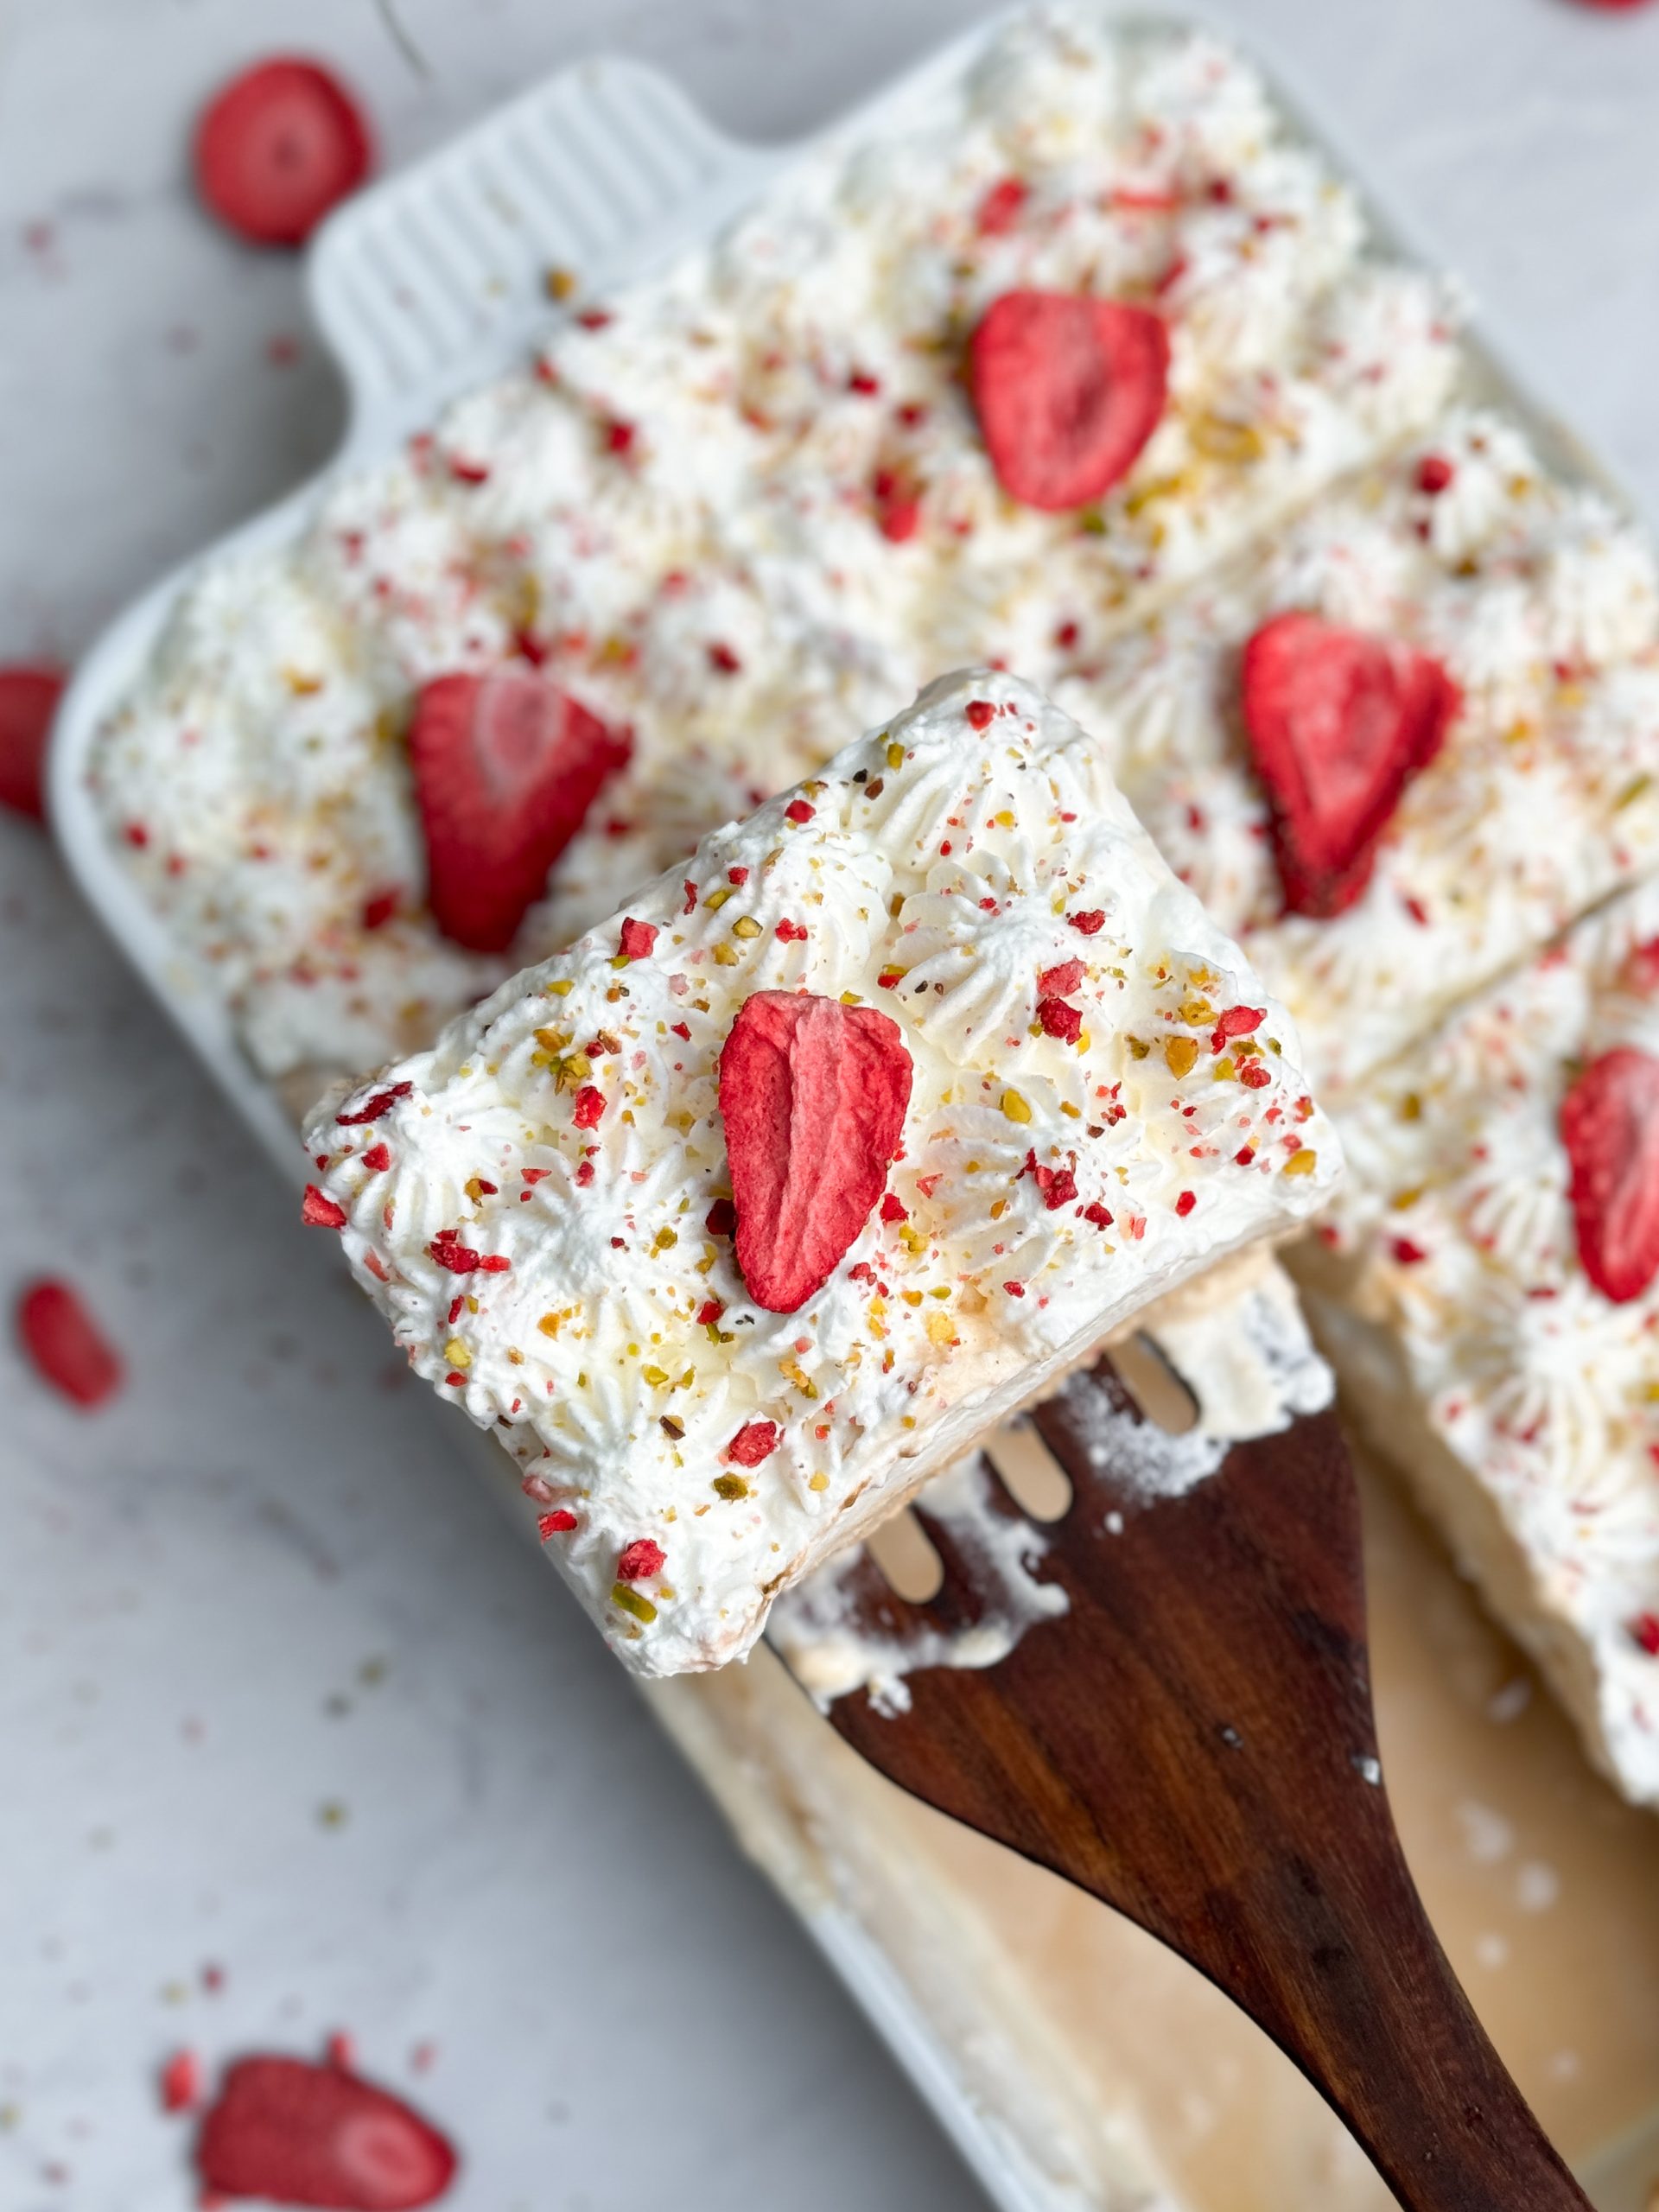 No bake chai tres leches cake in a rectangular ceramic dish decorated with piped whipped cream, freeze dried strawberries and pistachios. The cake is sliced and a spatula is pulling out a slice, picture from the top